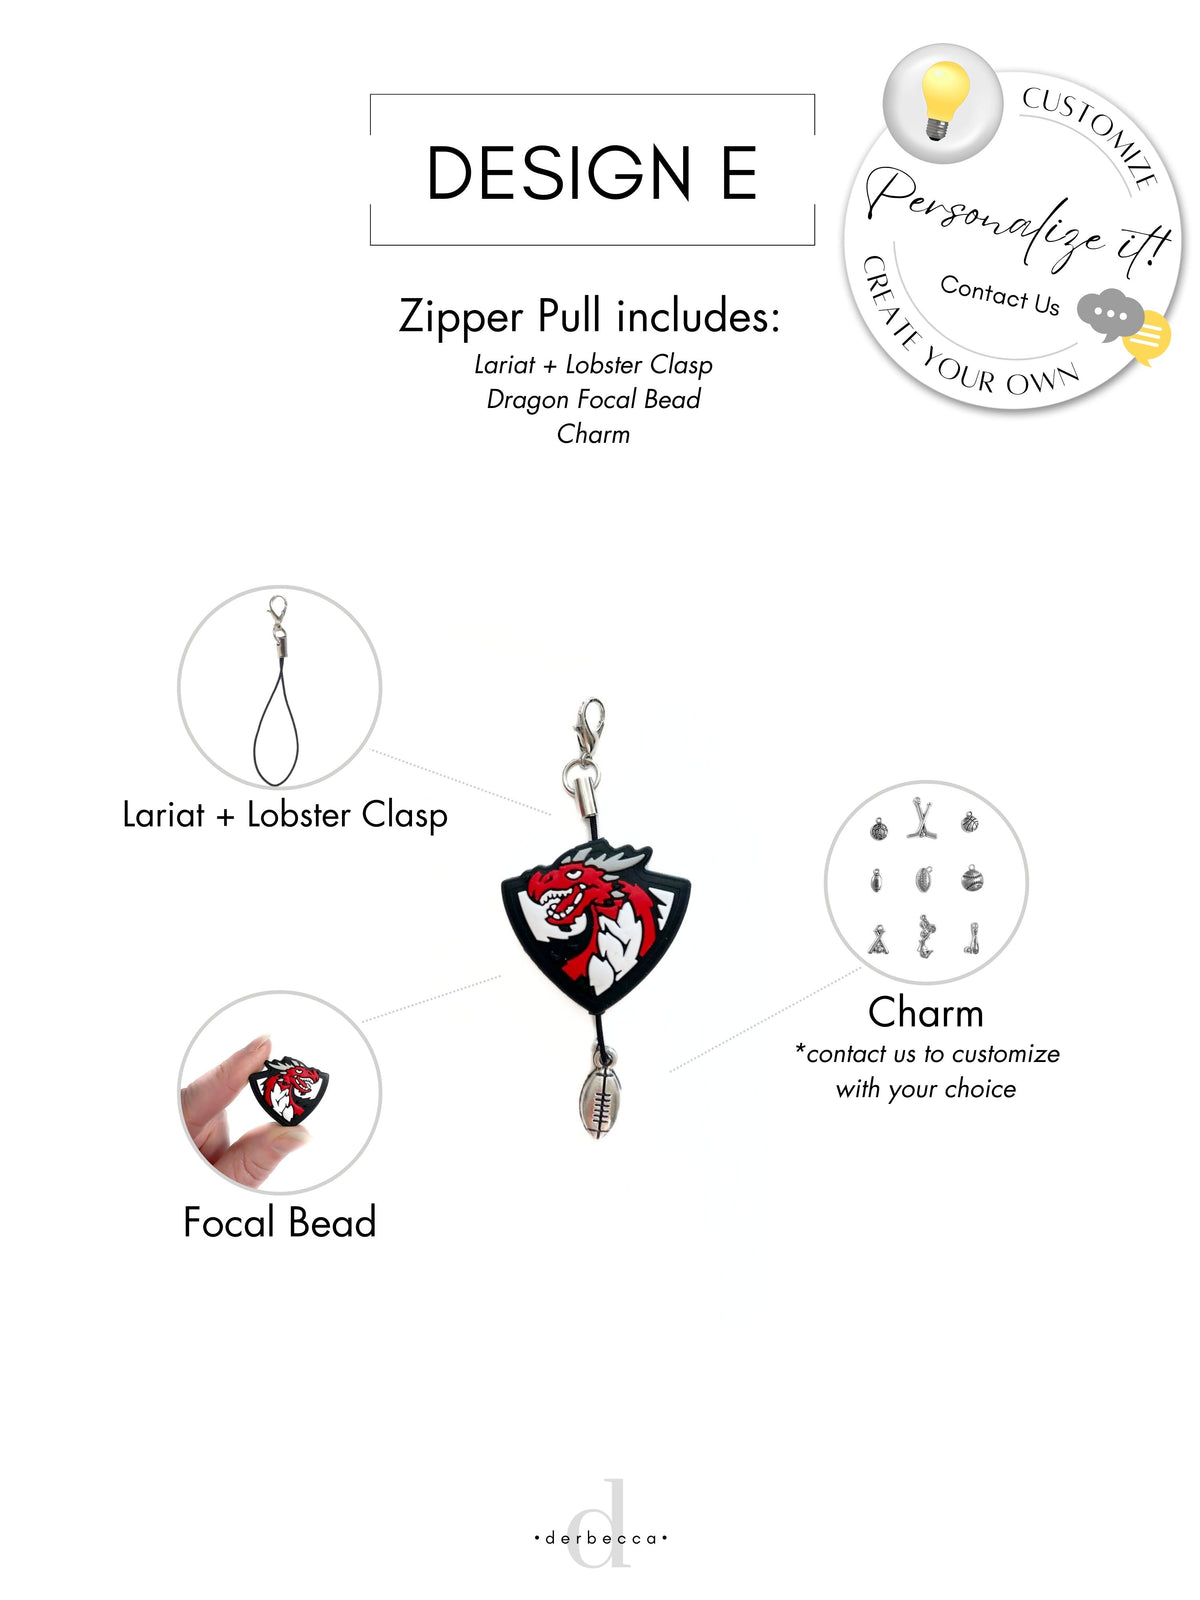 Zipper Pull with Lariat + Lobster Clasp Dragon Focal Bead Charm Football Charm Cell Phone Lasso